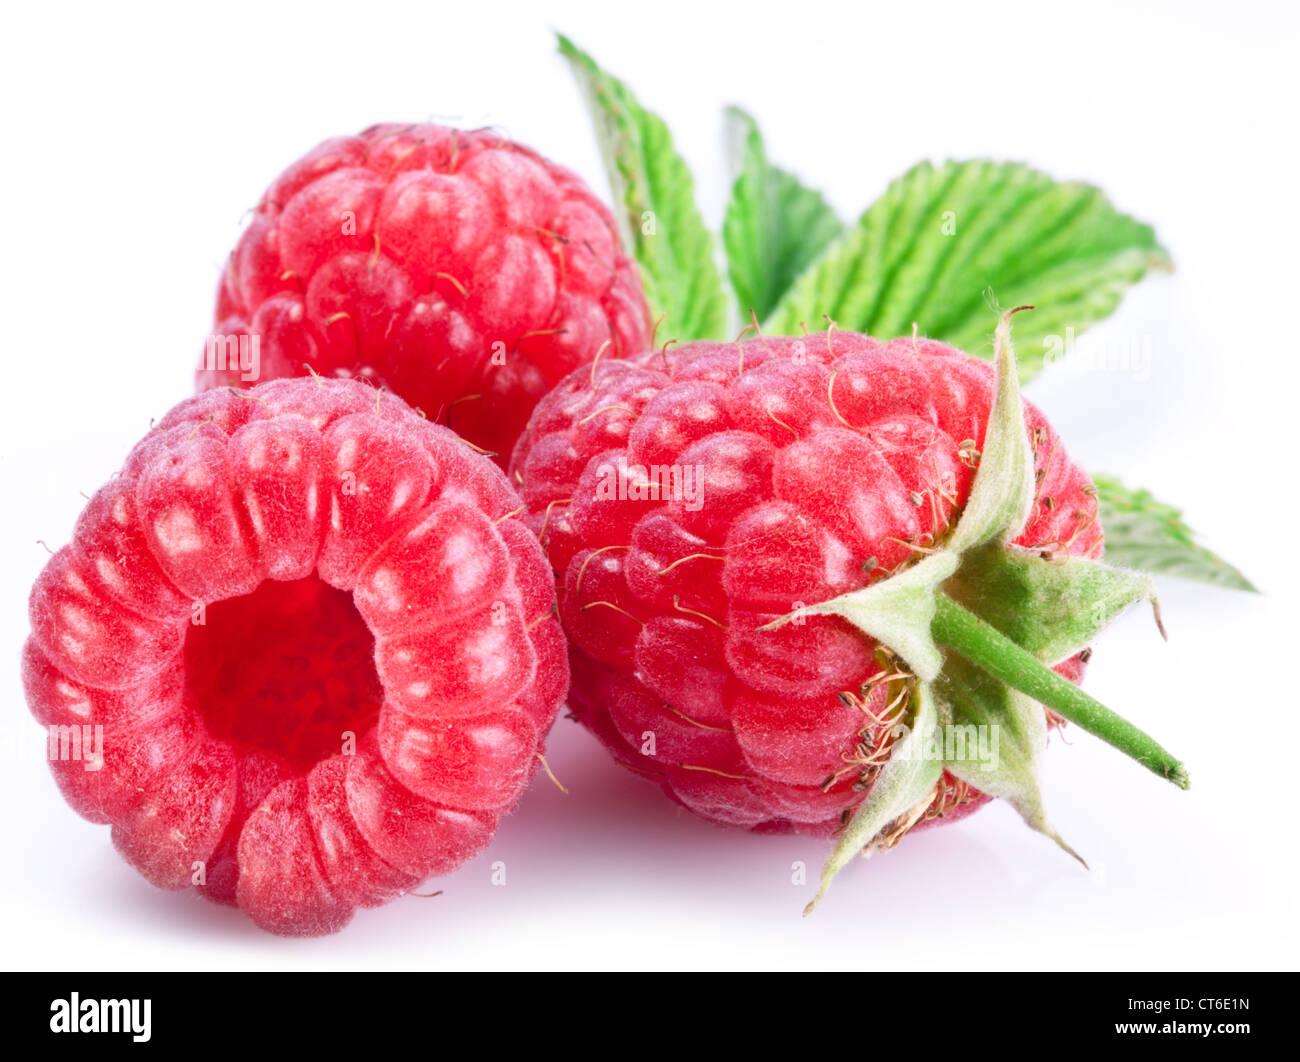 Ripe raspberries isolated on a white background. Stock Photo